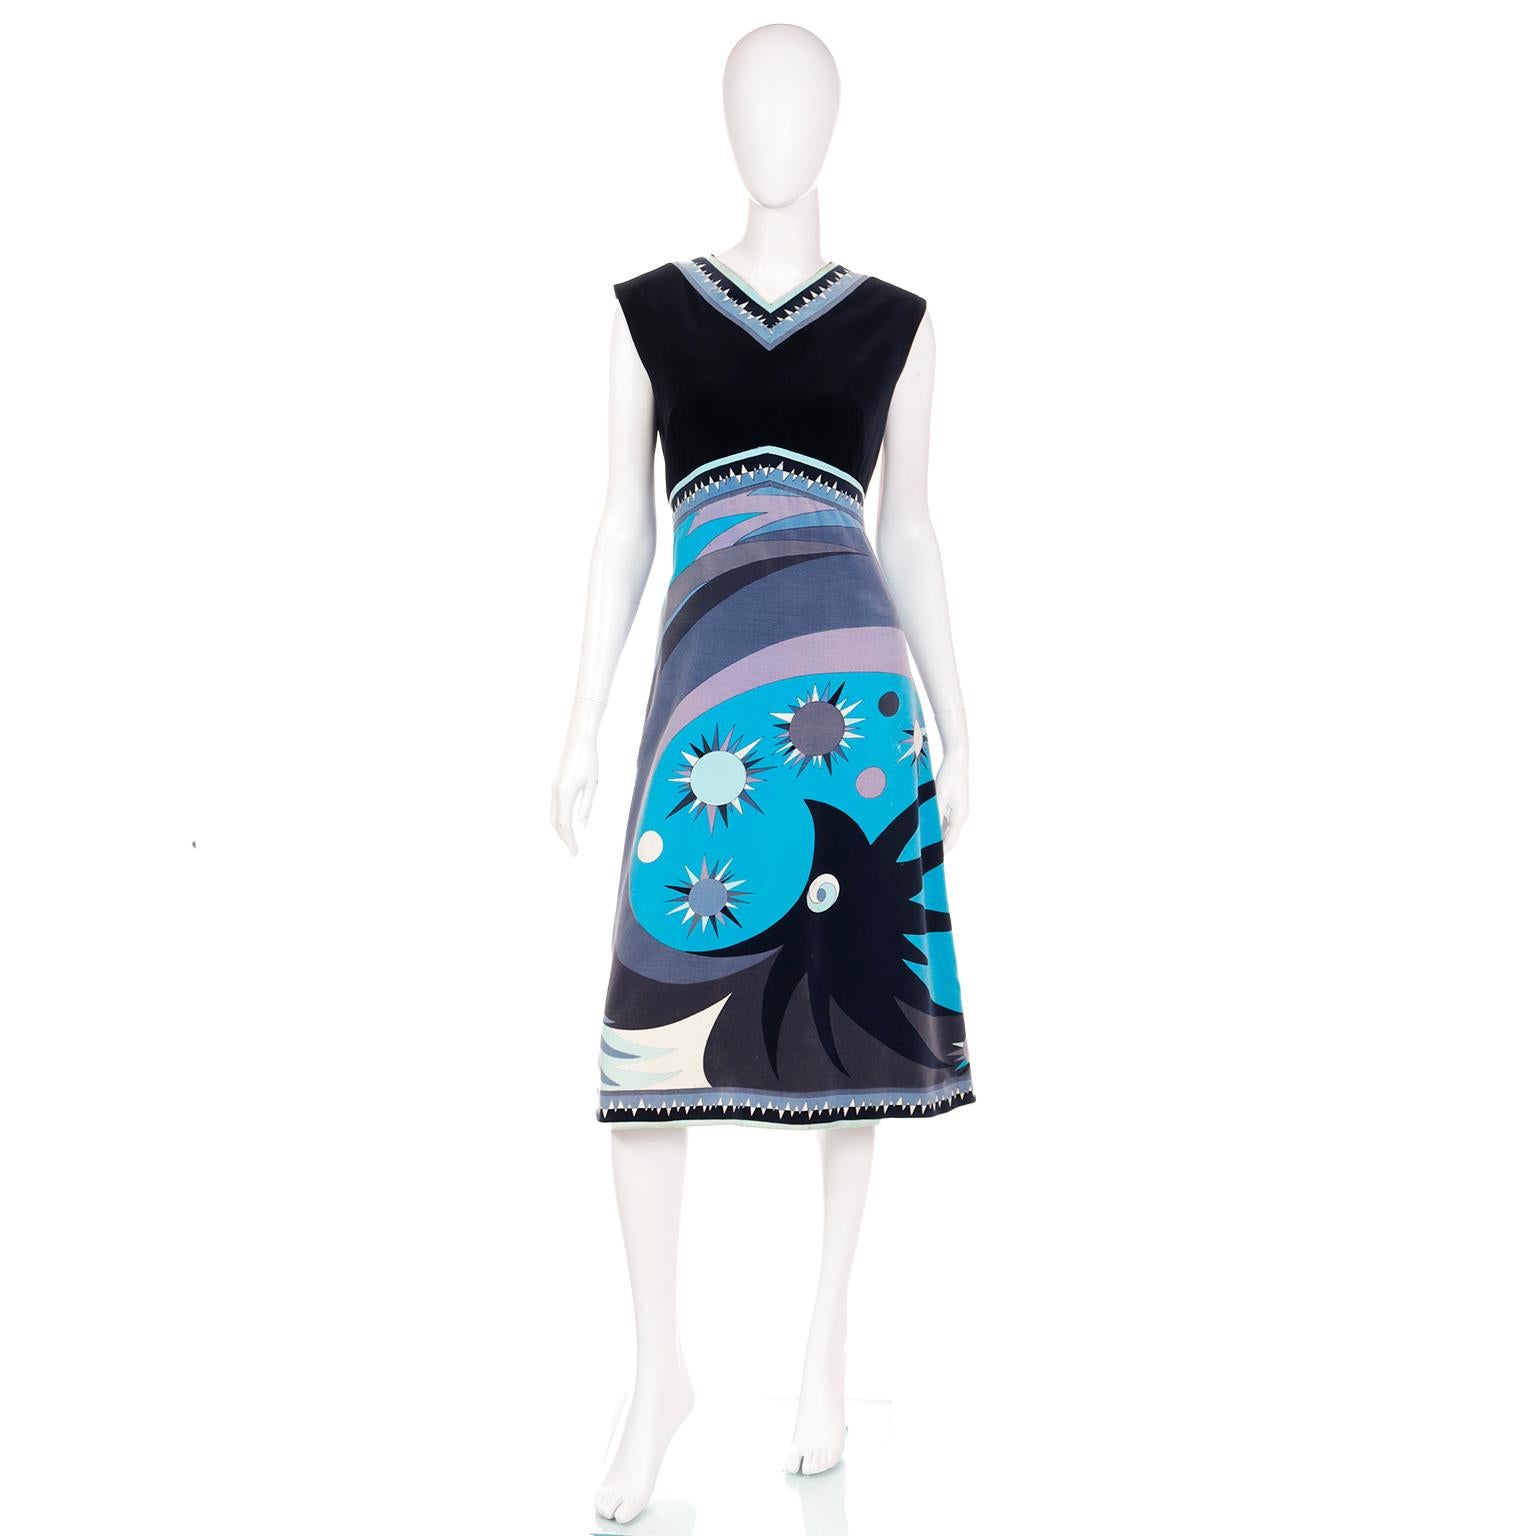 This outstanding 1960's vintage Emilio Pucci dress is in a smooth cotton velvet and features a rare bold abstract signature print in shades of blue, purple, pink and black. The signature print creates the lower portion and the bodice is black velvet